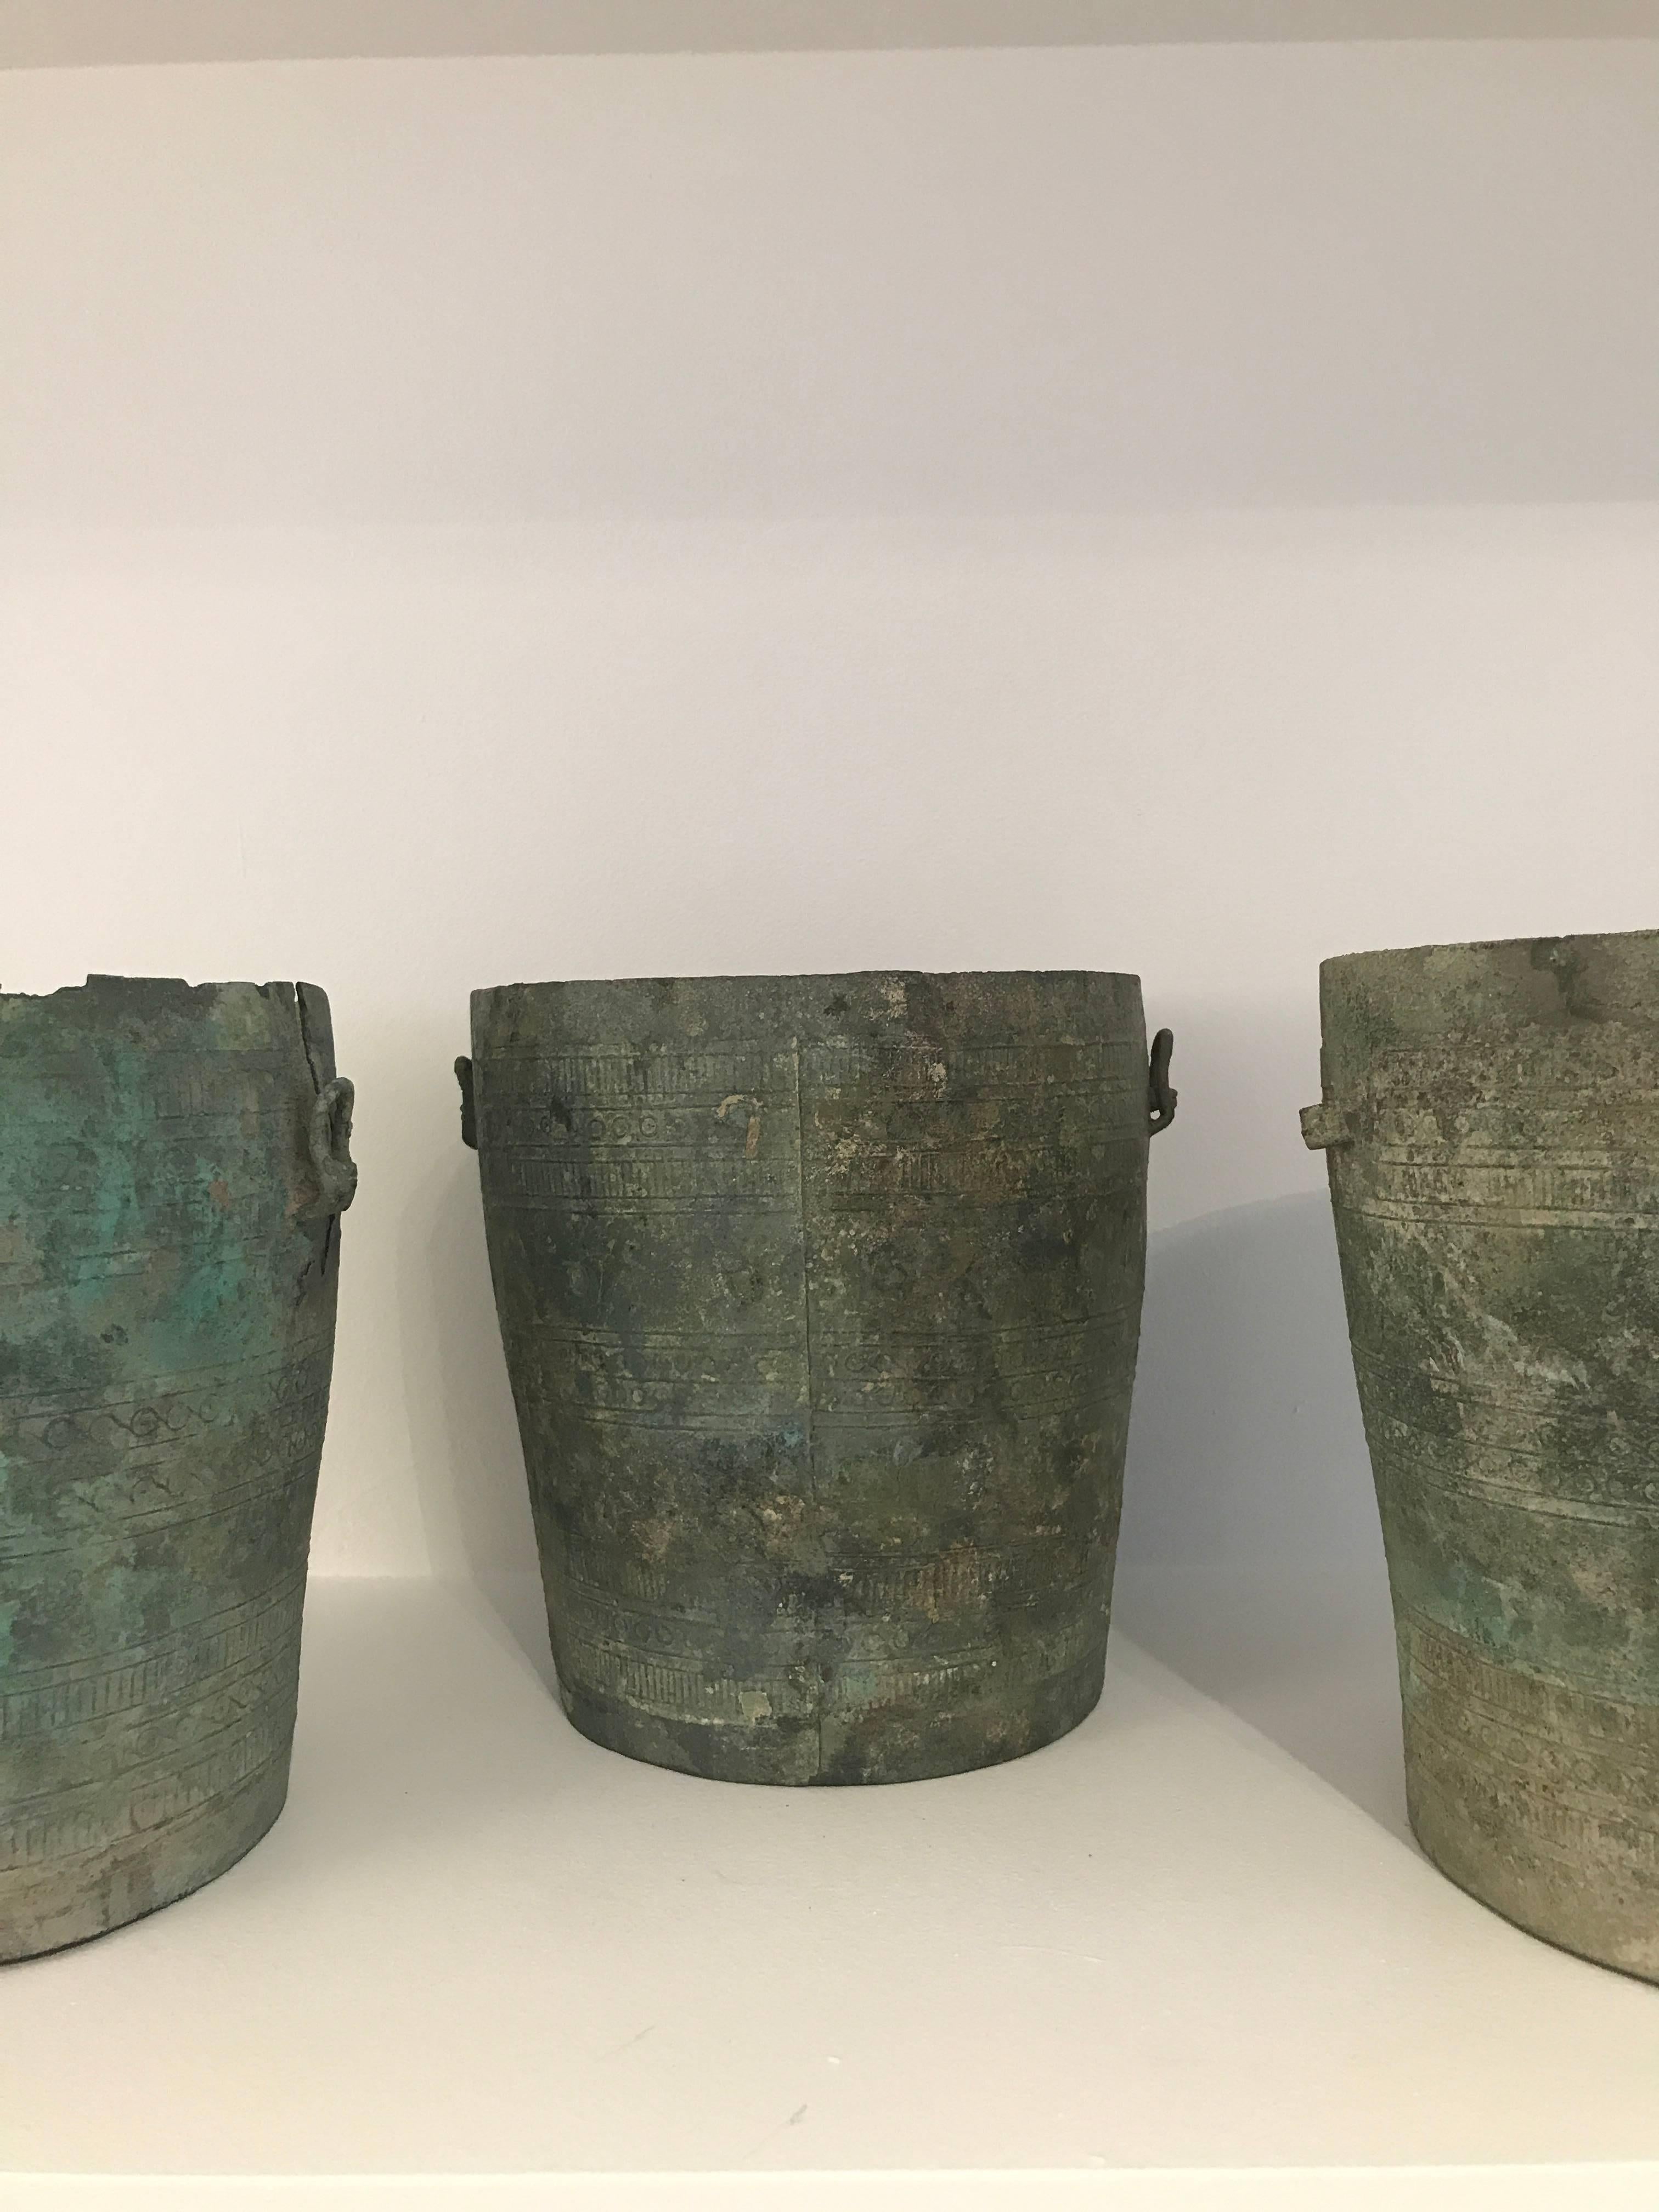 Exceptional set of 3 Bronze Recipients with decorations and beautiful green patina, called Thap
Dong Song period, 2000-1000 BC
South East Asia, Vietnam.
Measures: Height 22 cm, diameter 20 cm
Height 22 cm, diameter 22 cm
Height 22 cm, diameter